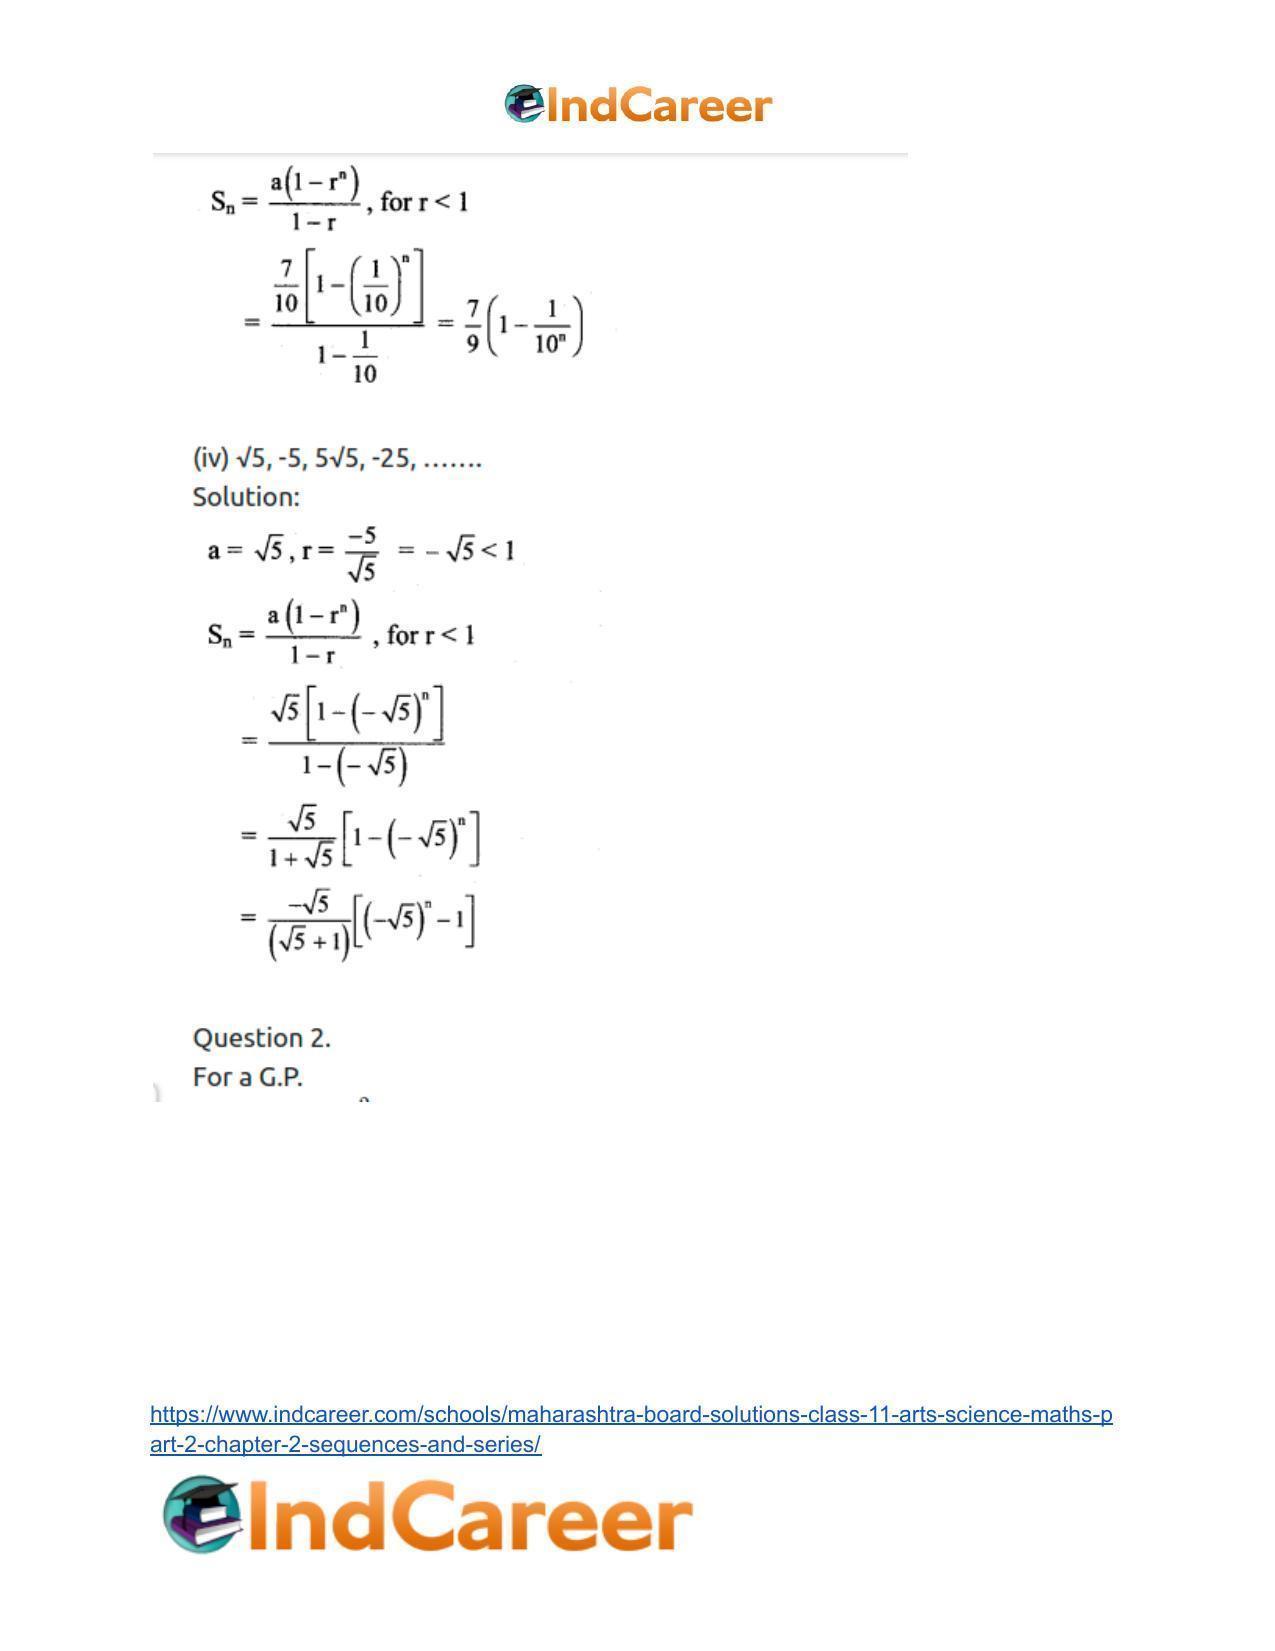 Maharashtra Board Solutions Class 11-Arts & Science Maths (Part 2): Chapter 2- Sequences and Series - Page 23